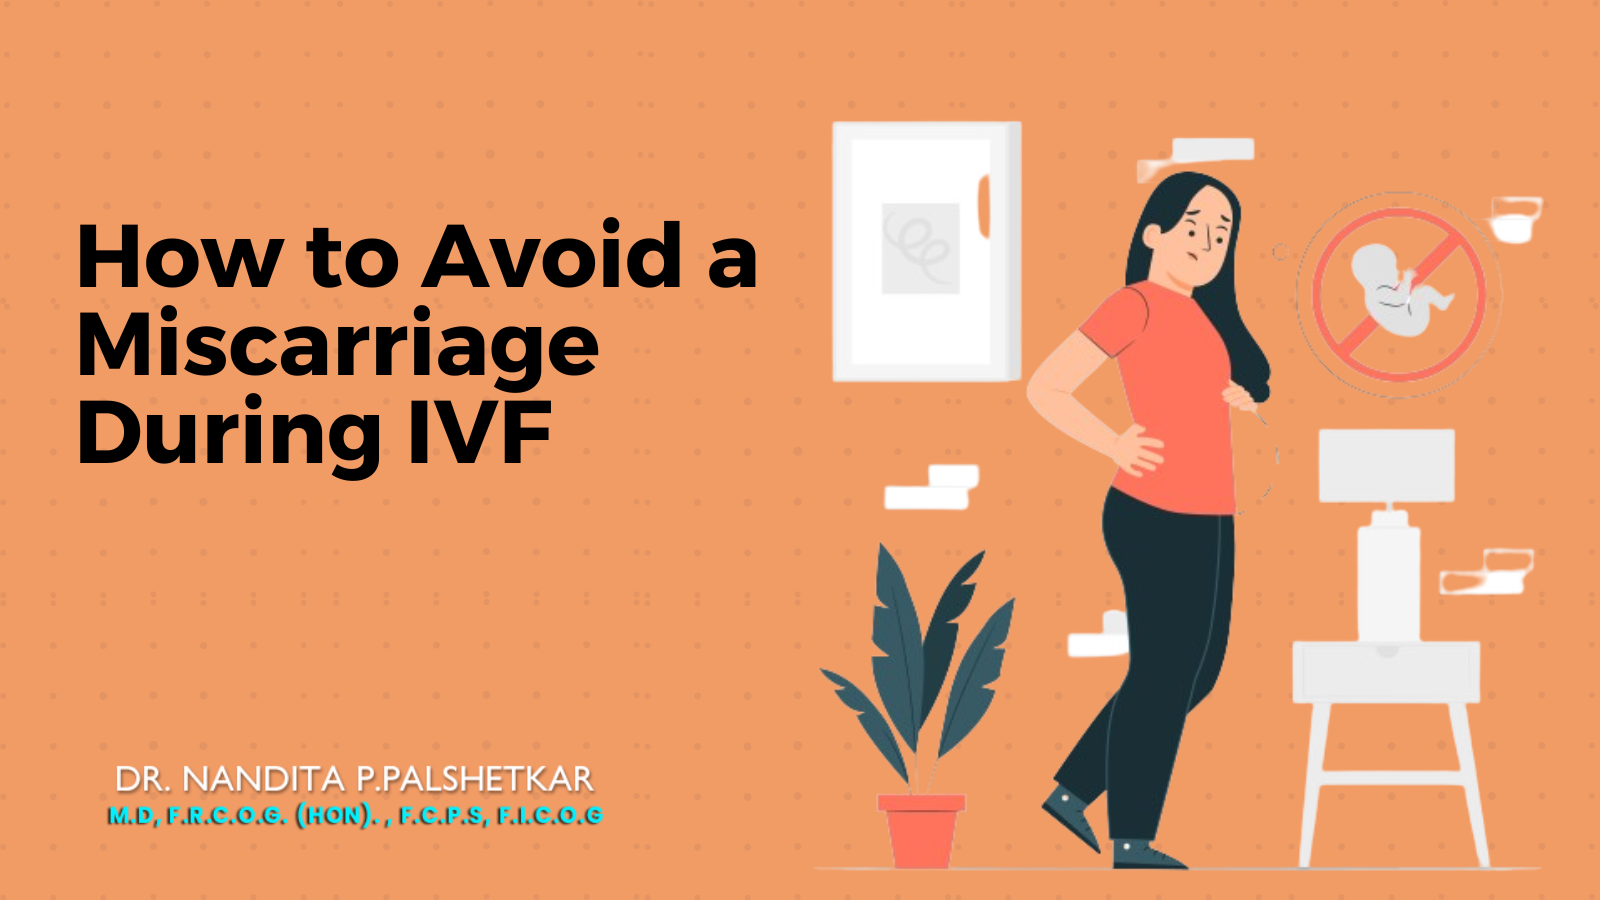 How to Avoid a Miscarriage During IVF